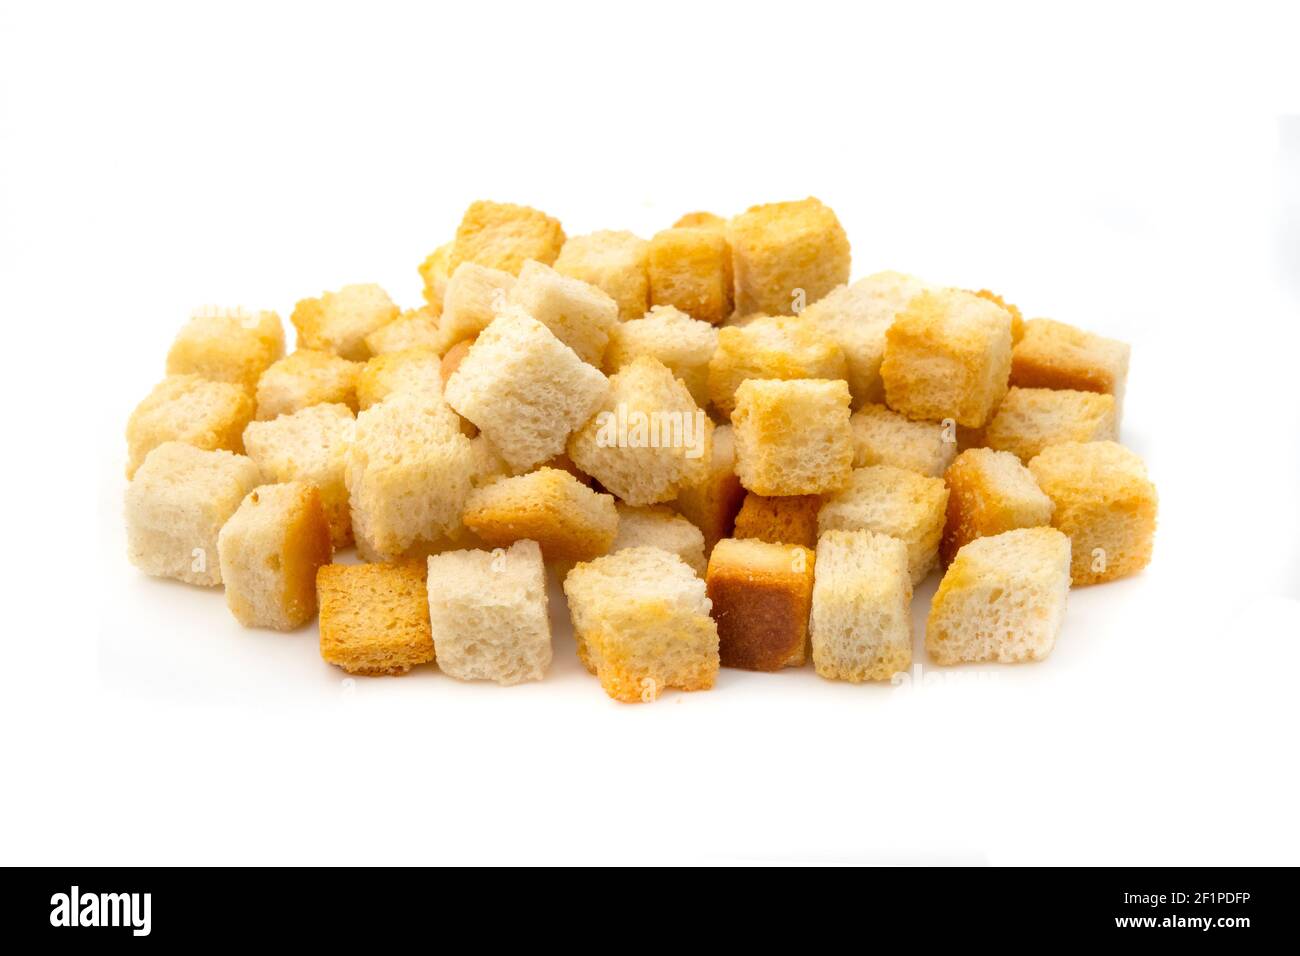 Homemade Croutons on a white background Stock Photo